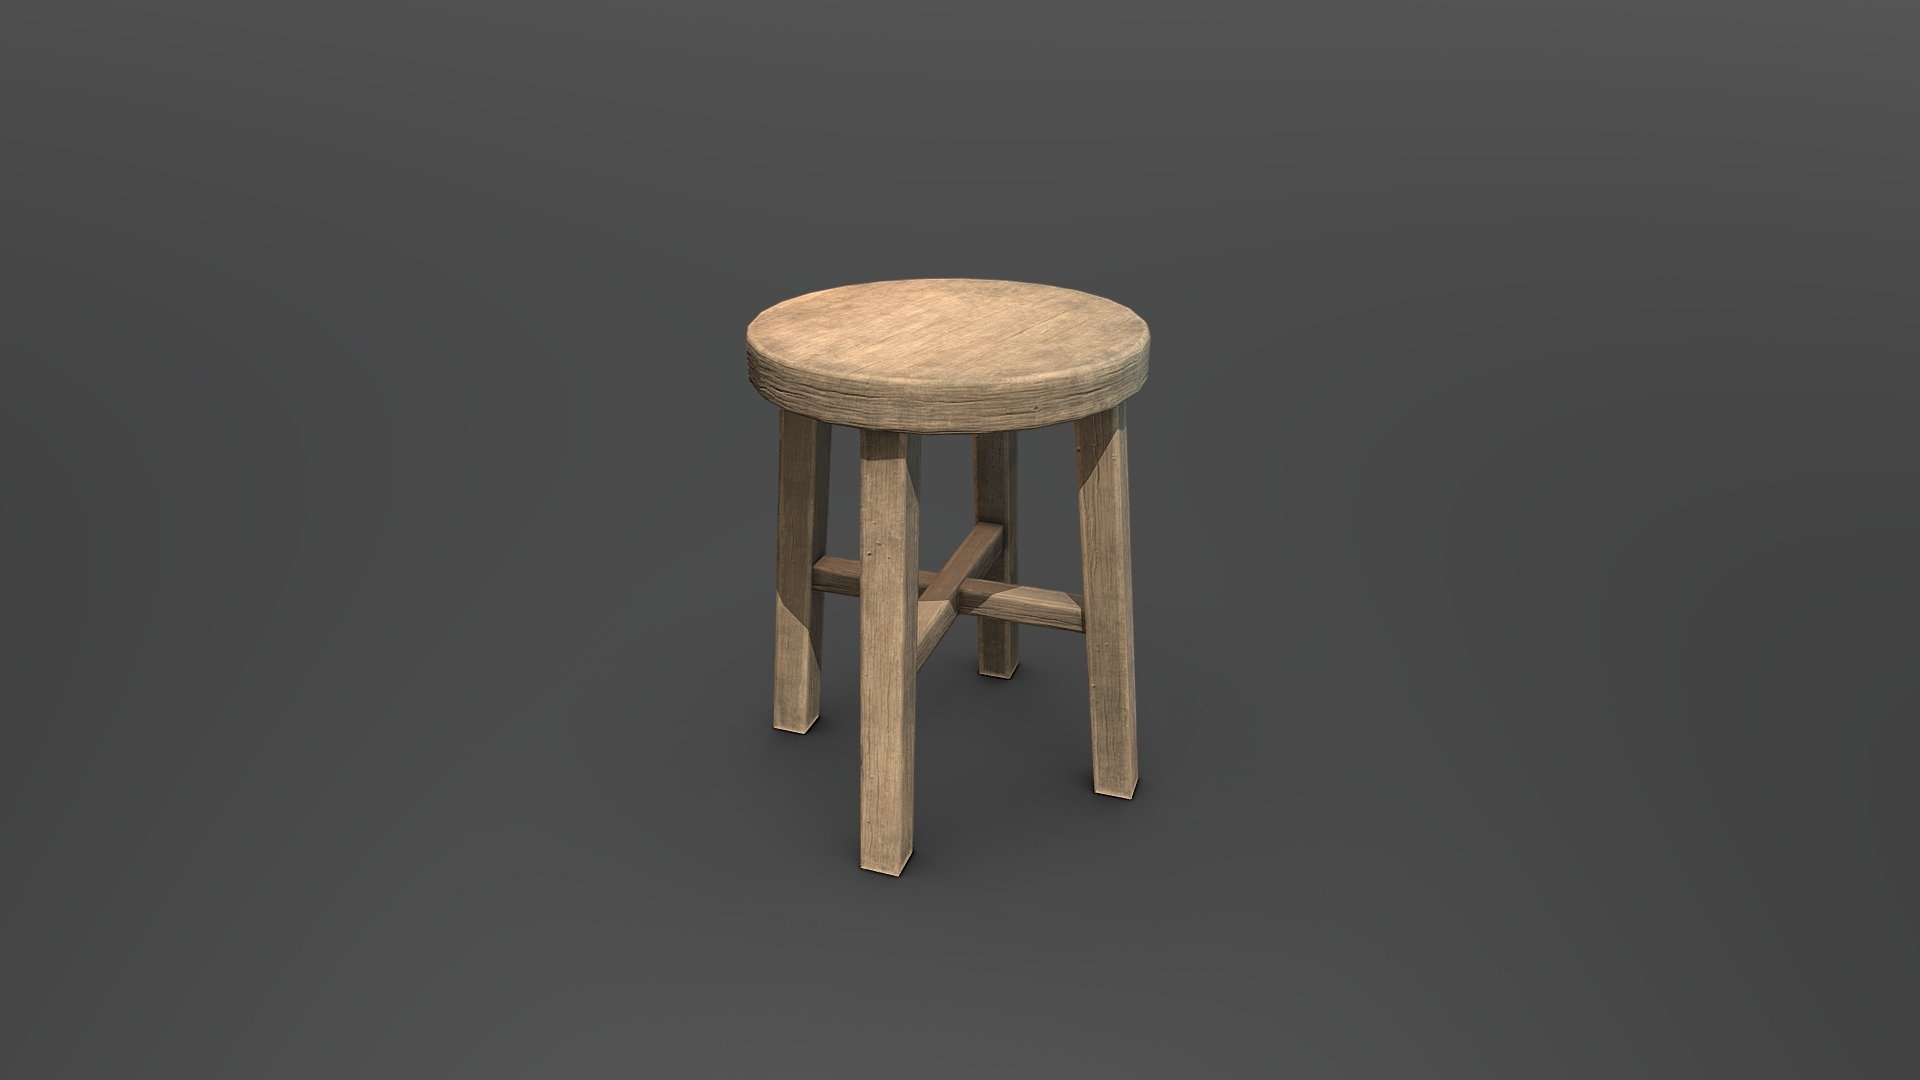 Wooden Chair for my environment with 2k texture test in ue4. It’s Packed with the other Wooden Chair~ Also If you need the channel packed texture pls contect me~ And the environment is done on artstation, check it out if you like it:)



Artstation : https://www.artstation.com/zian0912 - Wooden Chair - Download Free 3D model by Zian (@zian_0912) 3d model